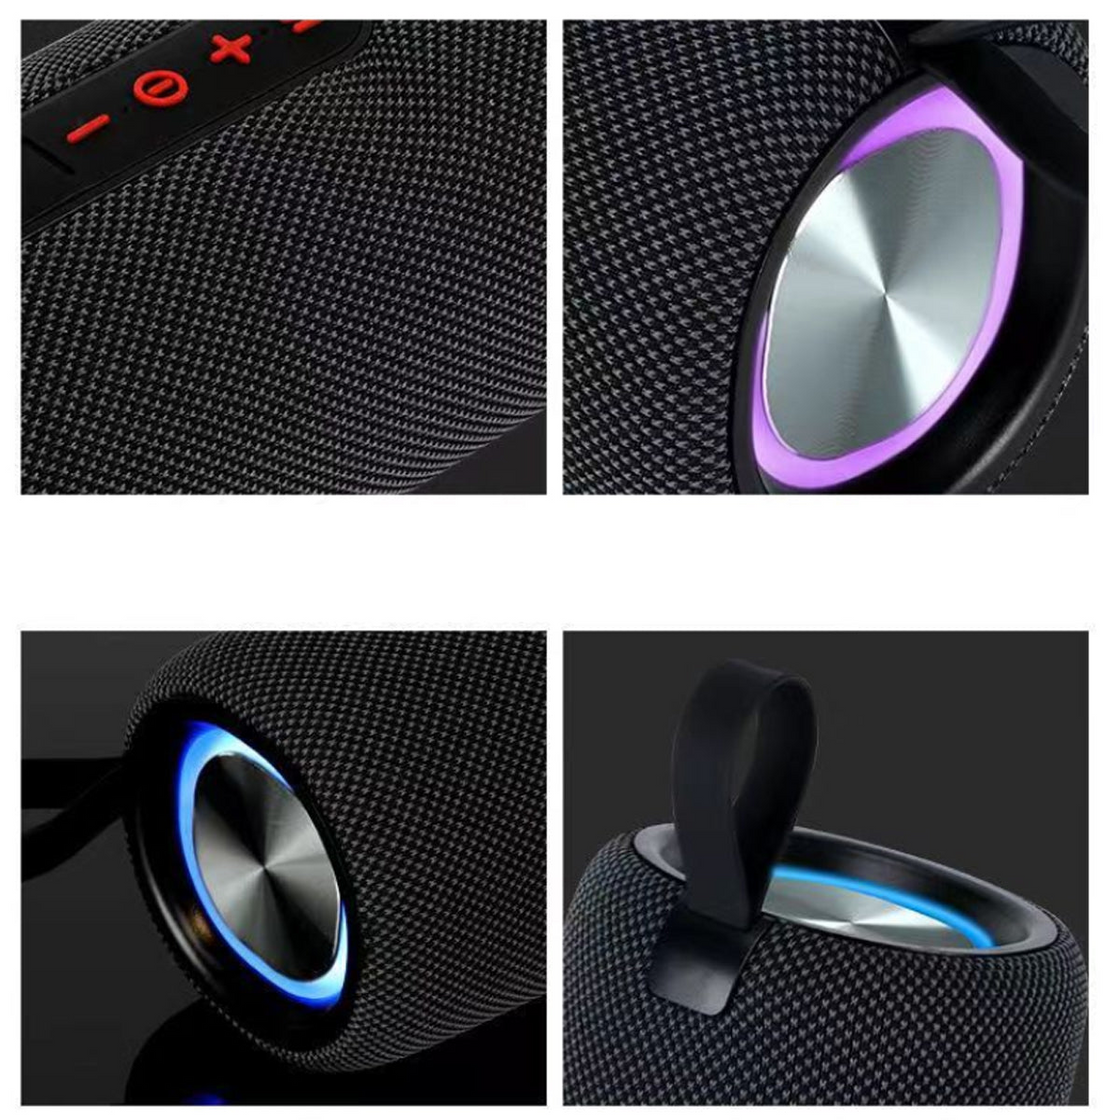 Dual Boom Bang Bluetooth Speaker - High Stereo Sound, 360° Dual Full Range, Hands-Free Calls, 4 Playback Modes